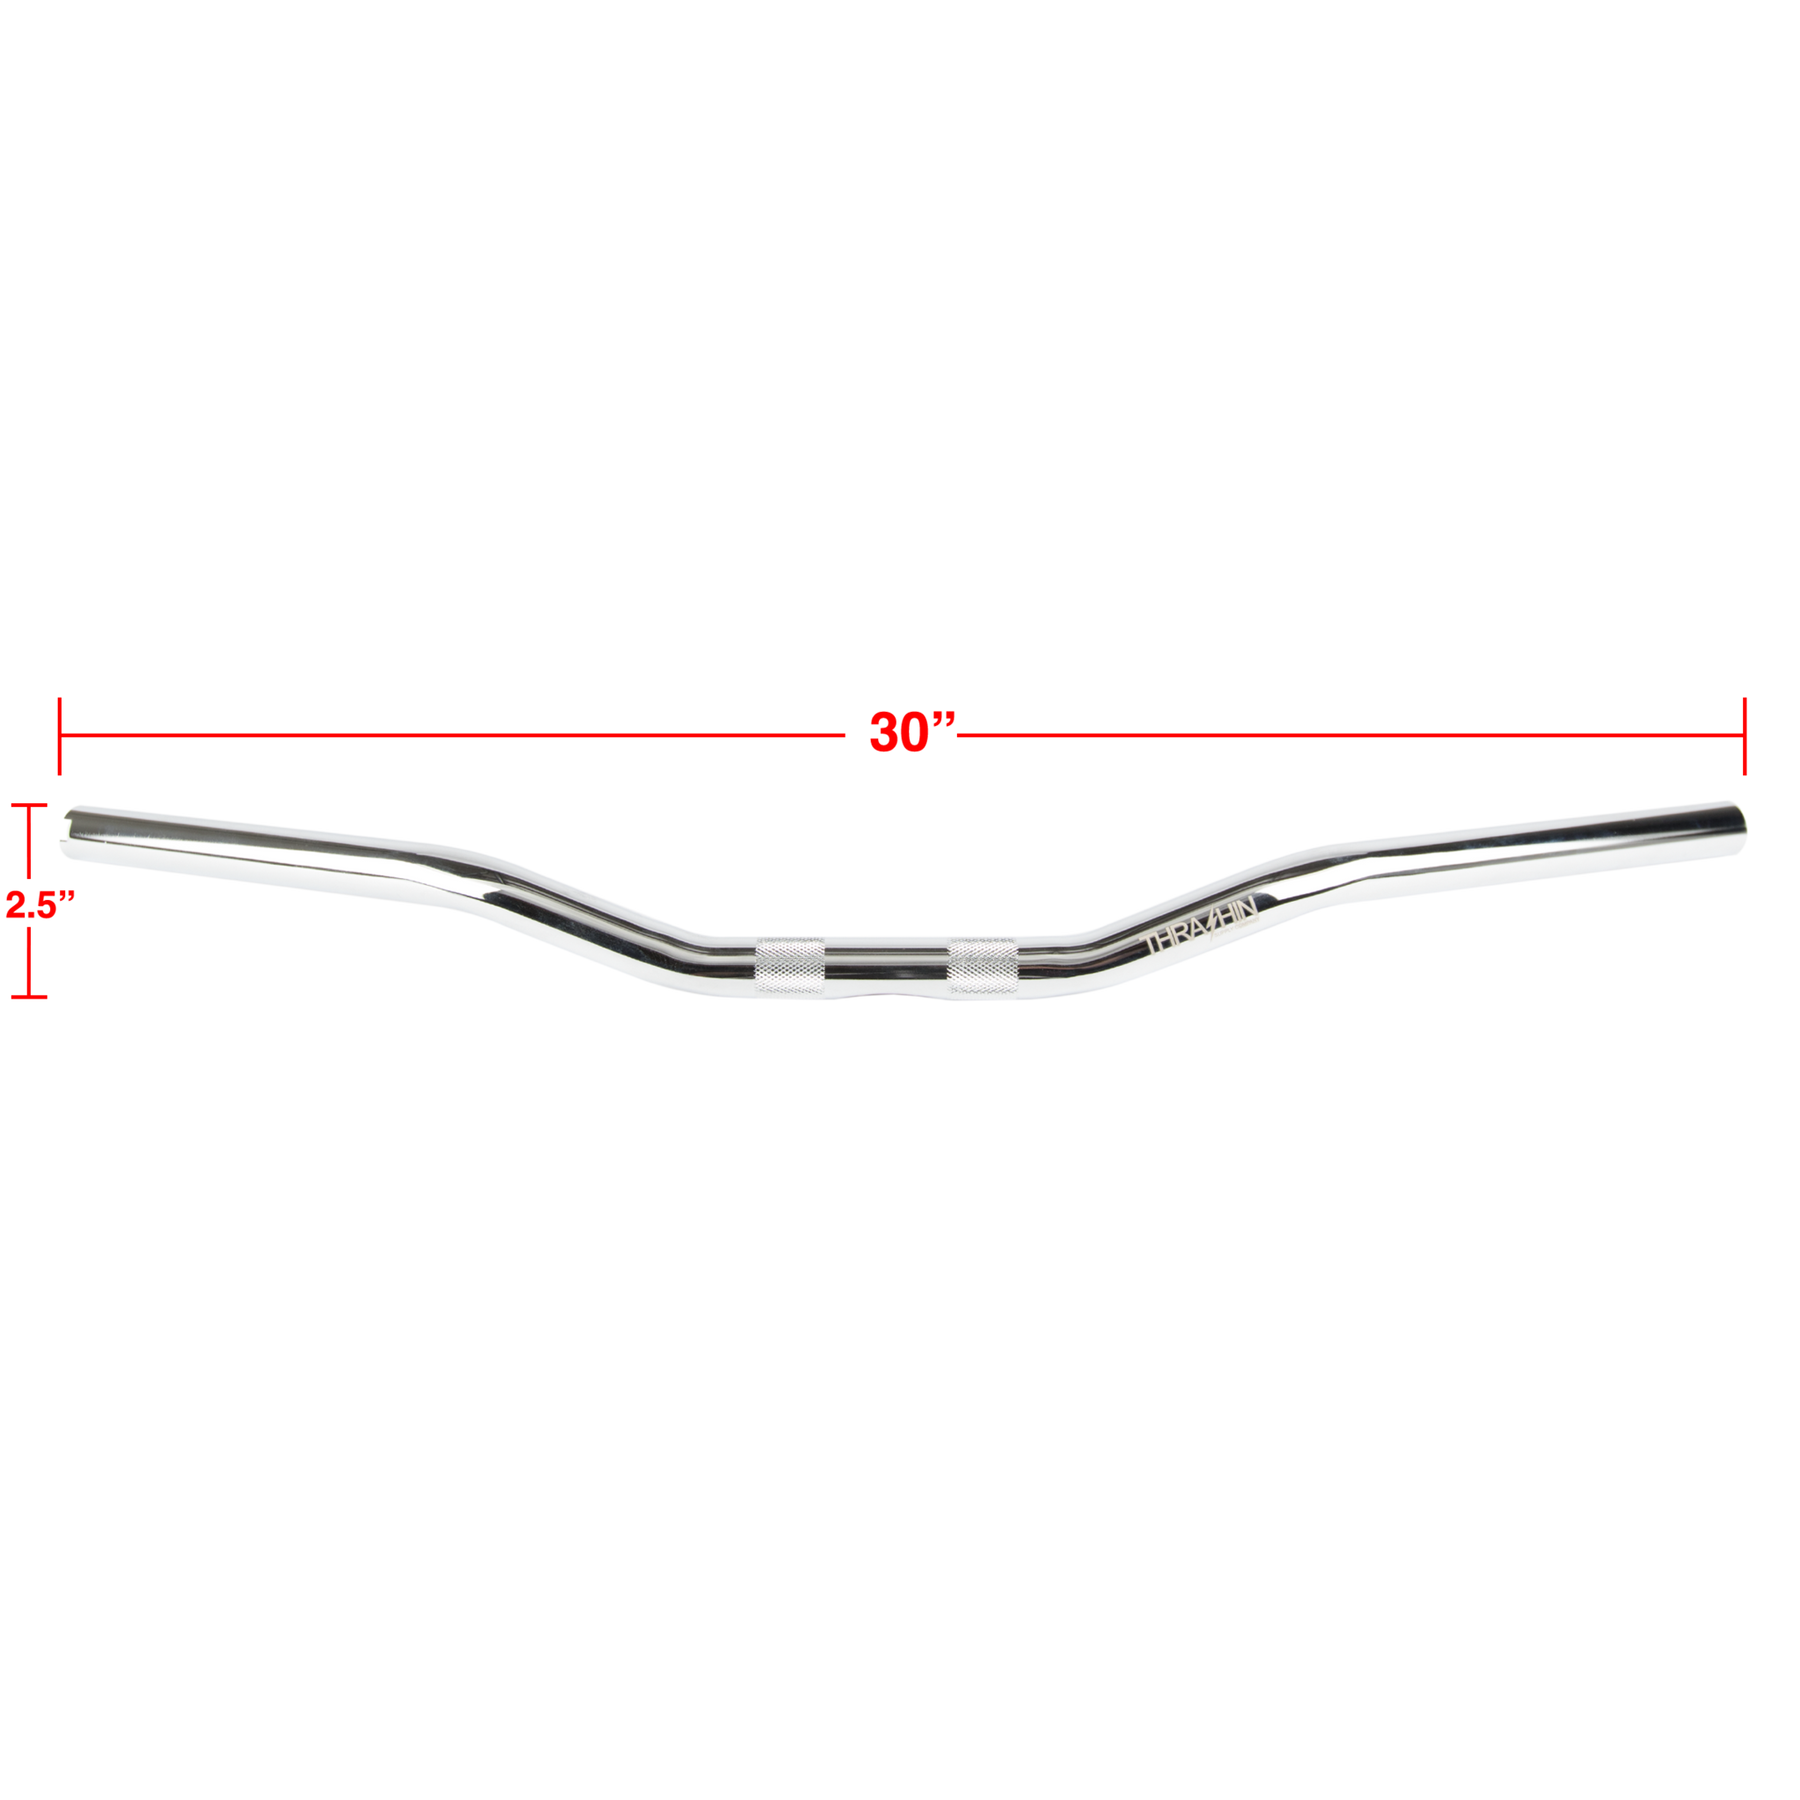 Guidon "Low Bend"